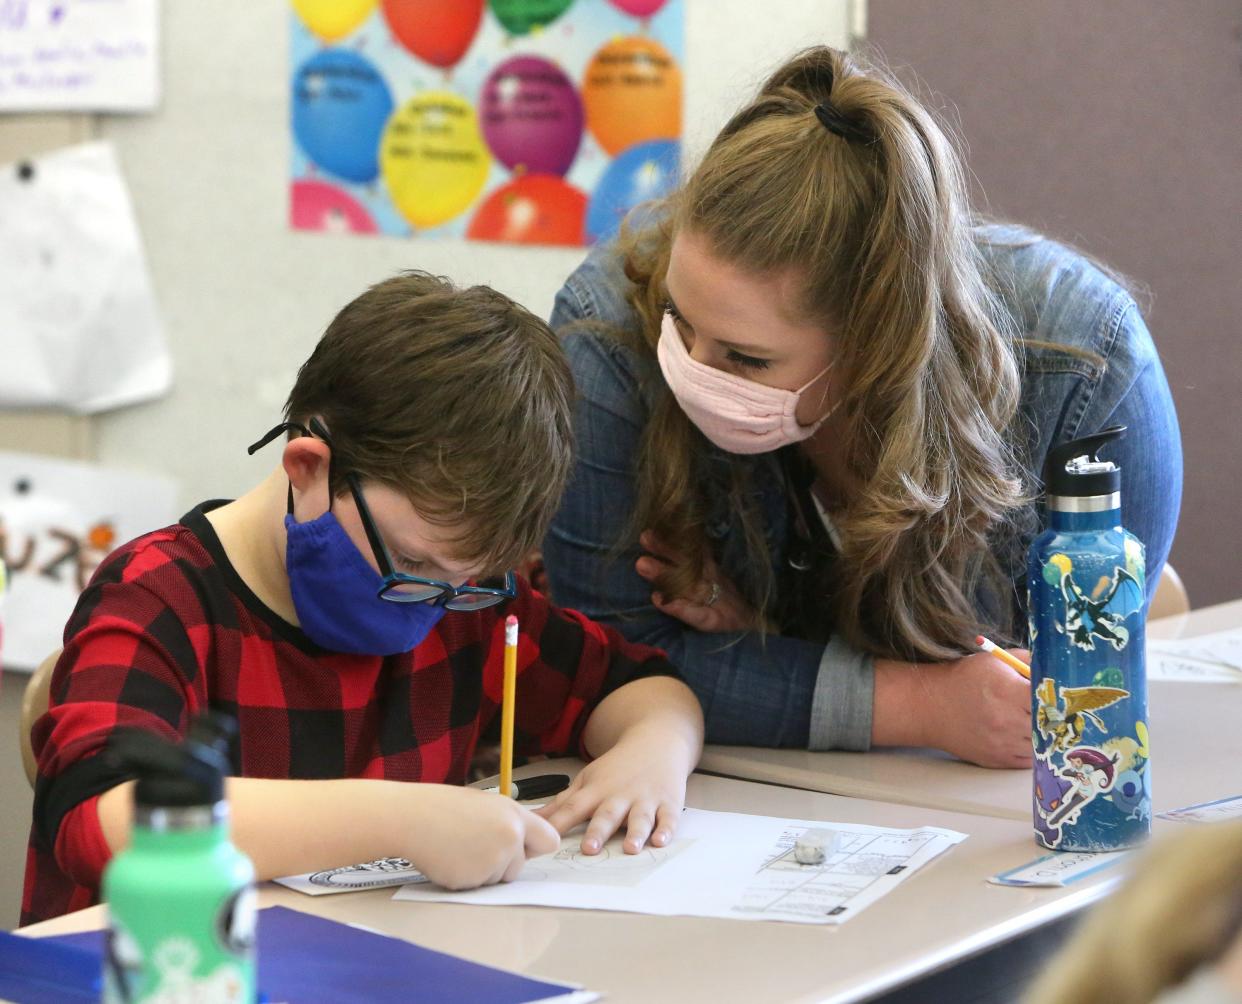 Graham Delauder is helped by teacher Lindsay Fuzer as he creates artwork in his fourth grade class at Strausser Elementary School in Jackson Township. Fuzer's class created drawings that will be etched onto a satellite to be launched by NASA later in 2022. Strausser was one of five schools in the U.S. to be selected for the project.